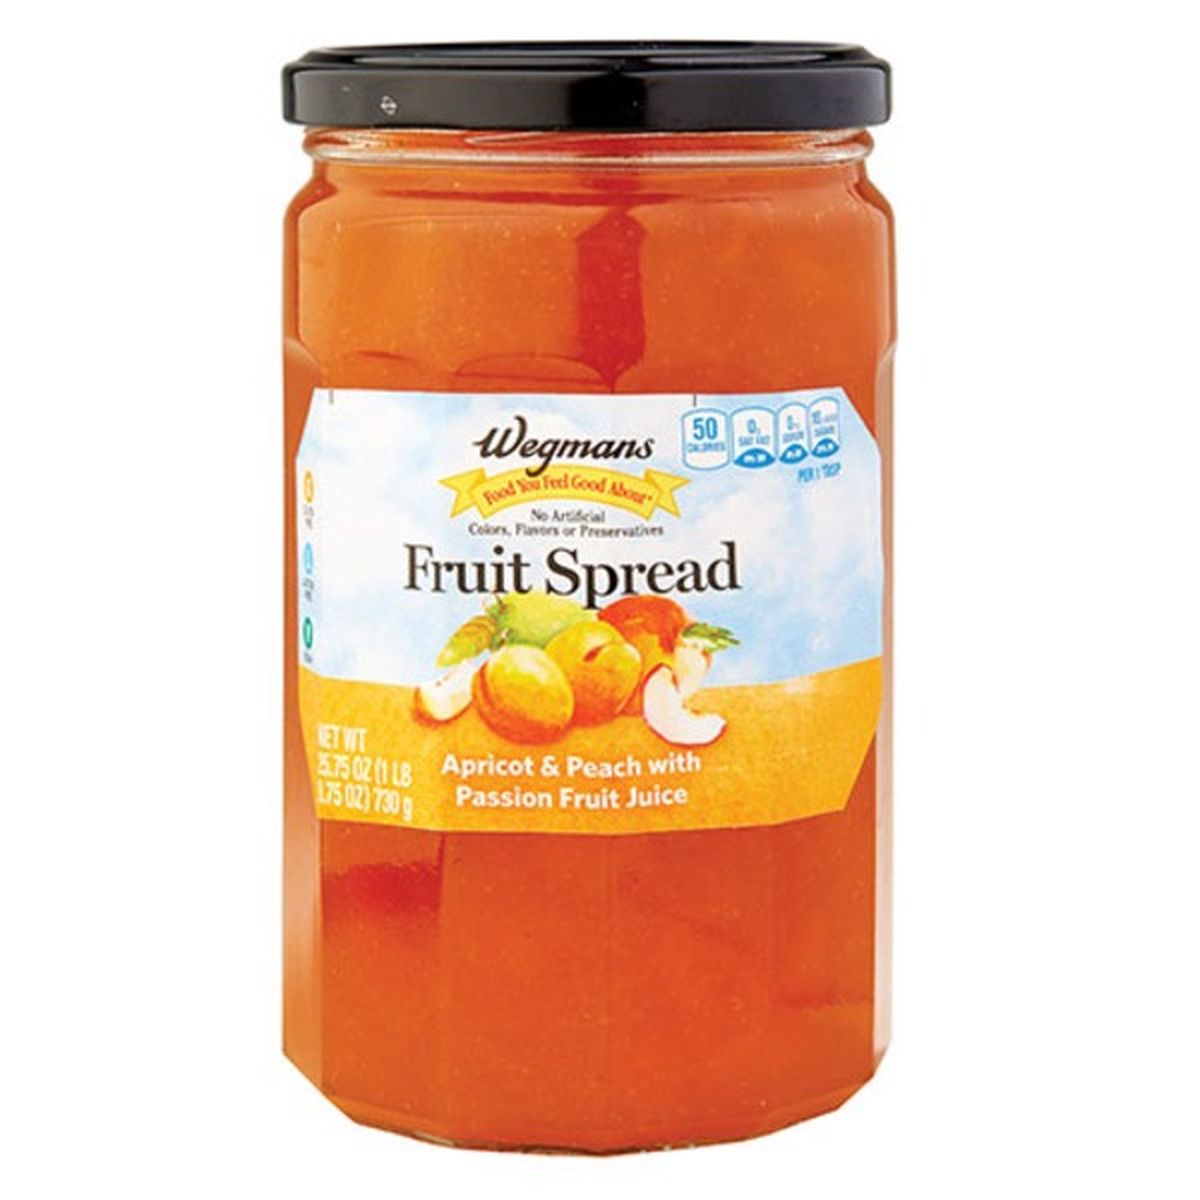 Calories in Wegmans Apricot & Peach with Passion Fruit Juice  Fruit Spread